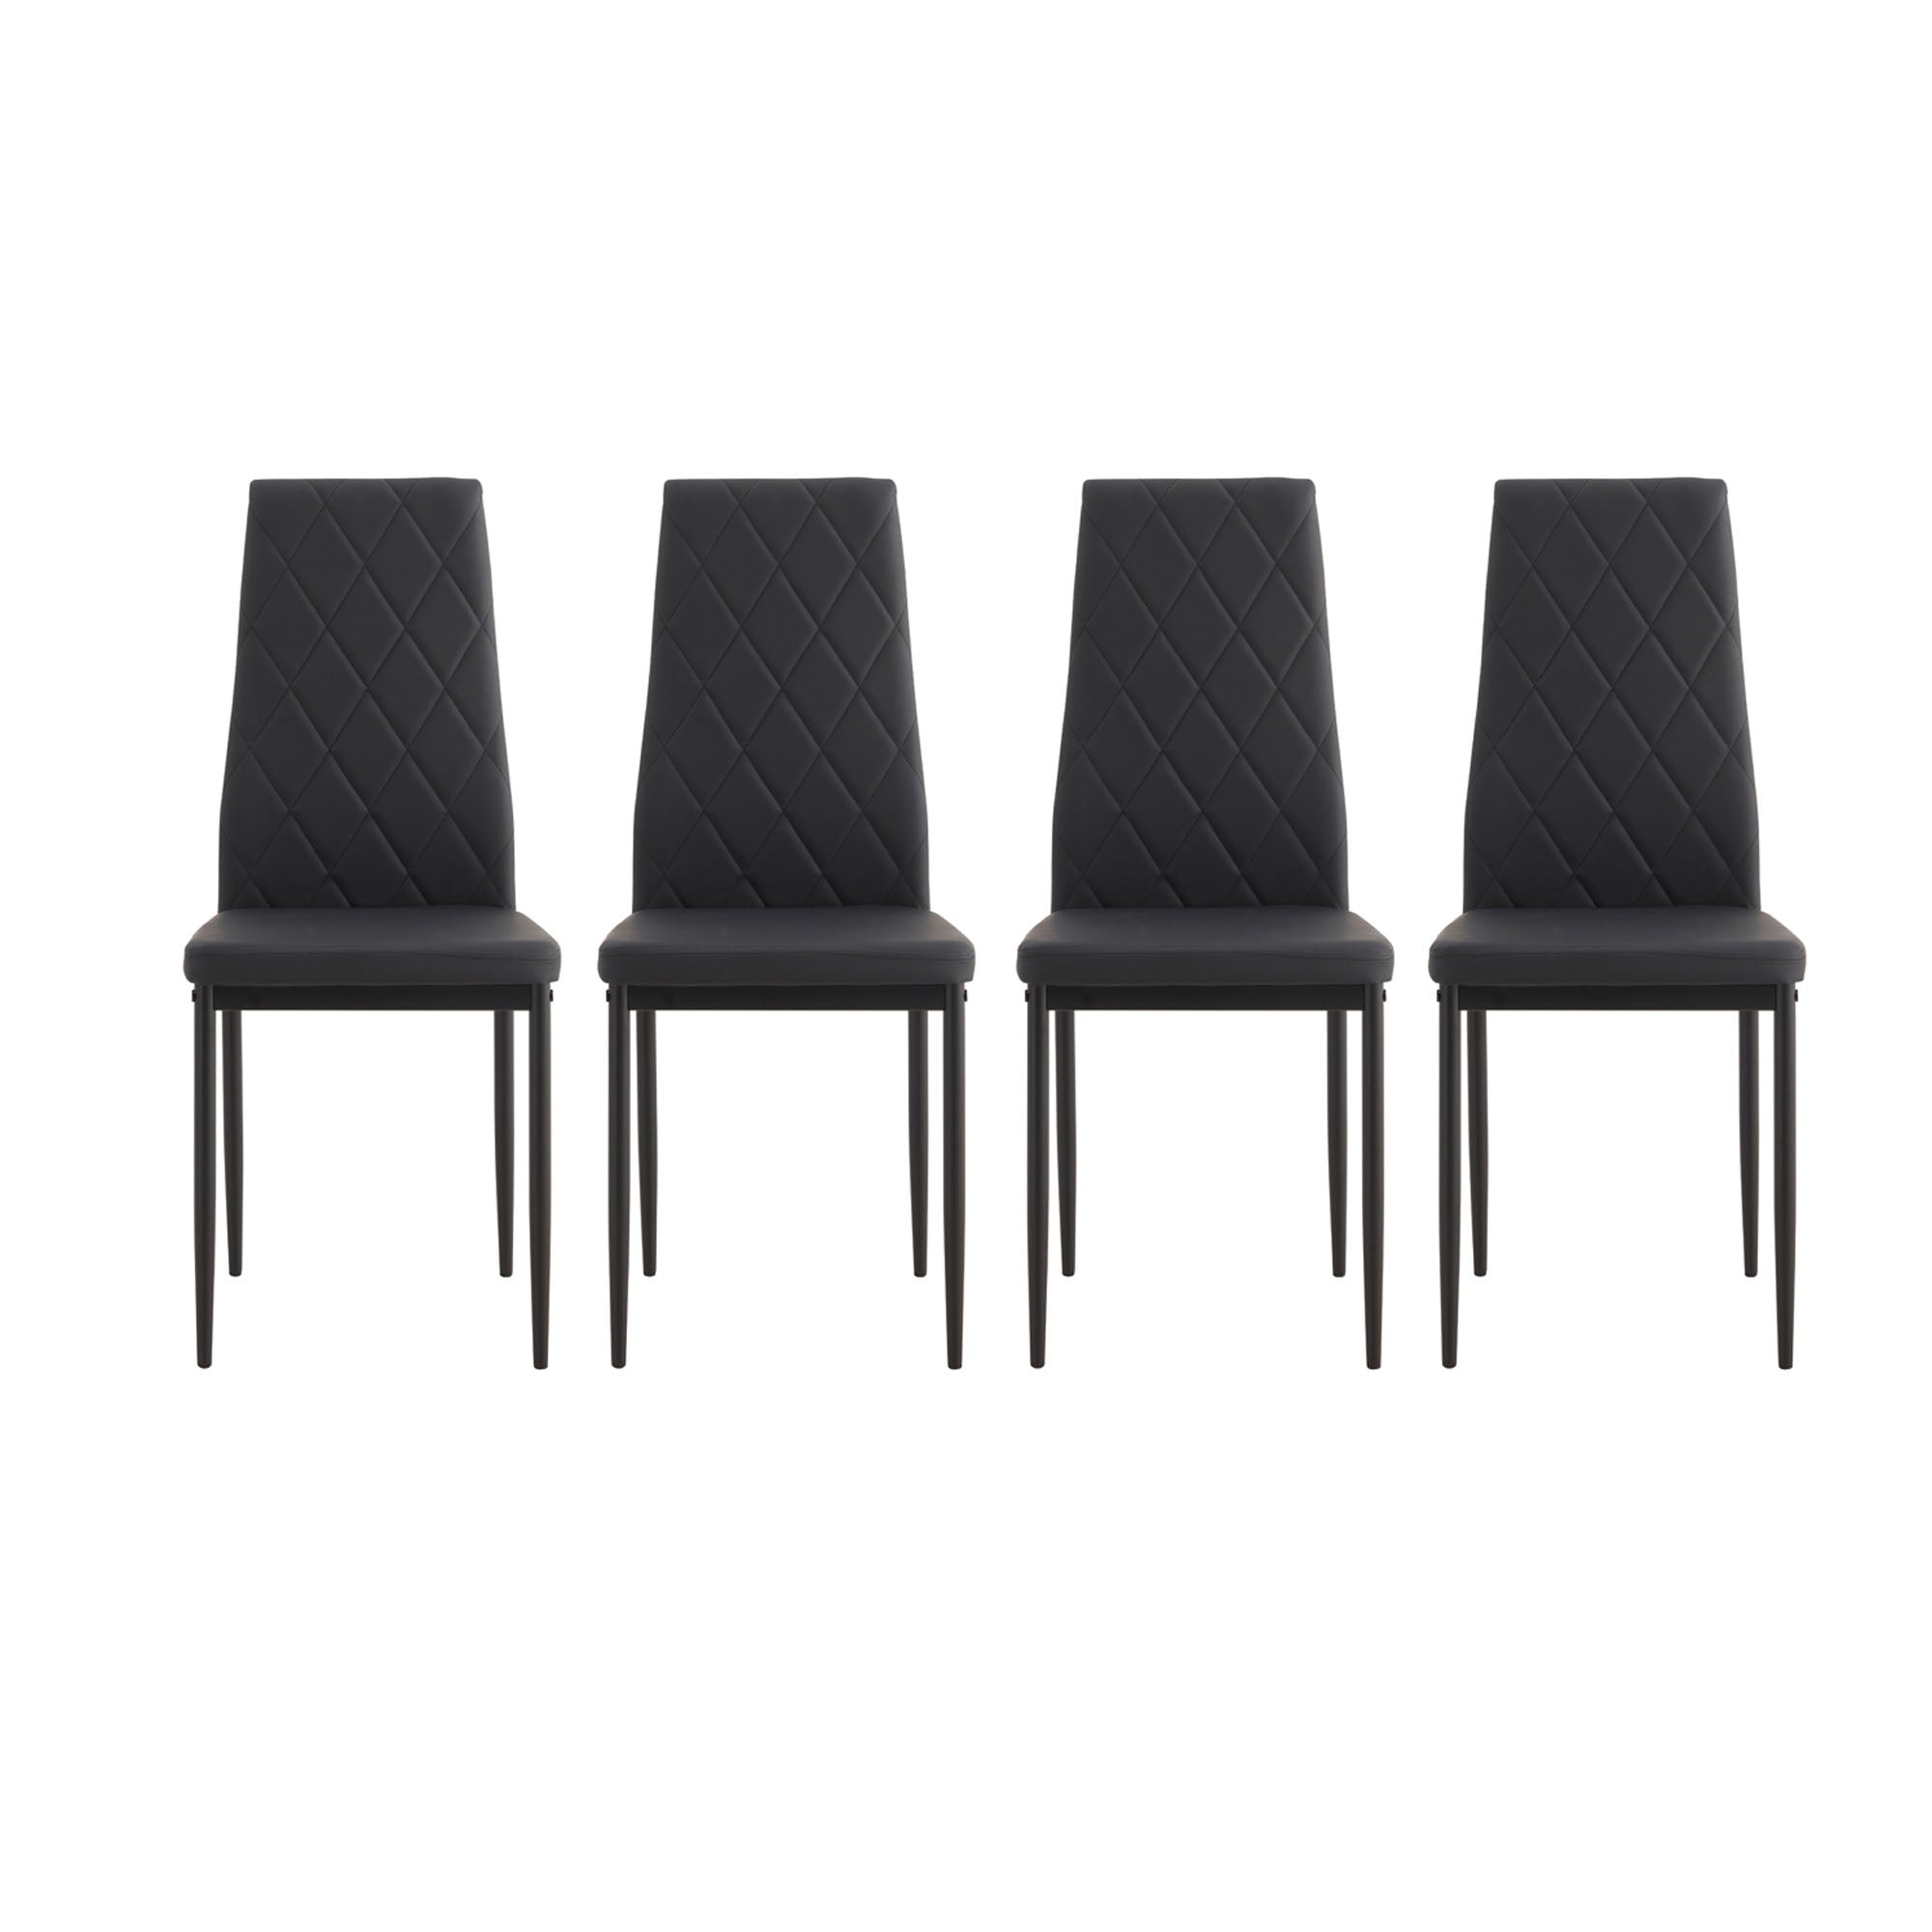 4 pcs Black Simple Modern Kitchen Dining Chairs with High Density Sponge and Metal Legs